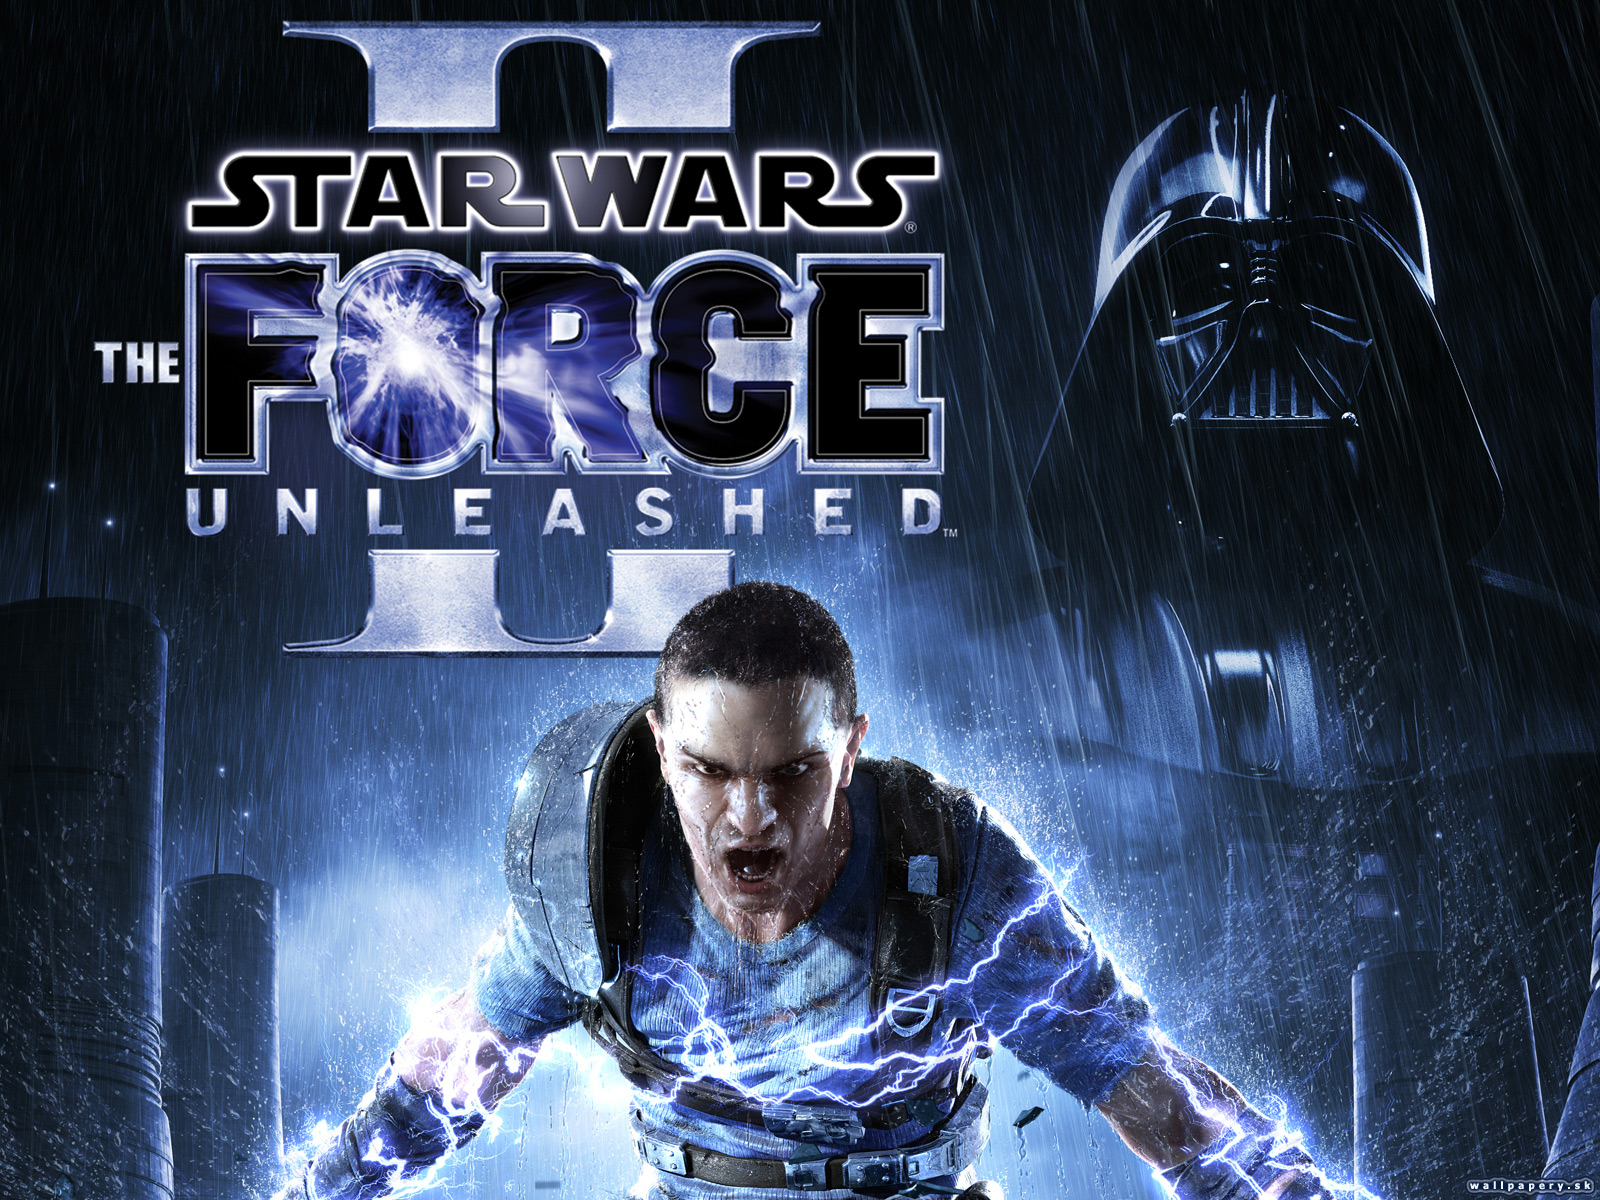 Star Wars: The Force Unleashed 2 - wallpaper 2